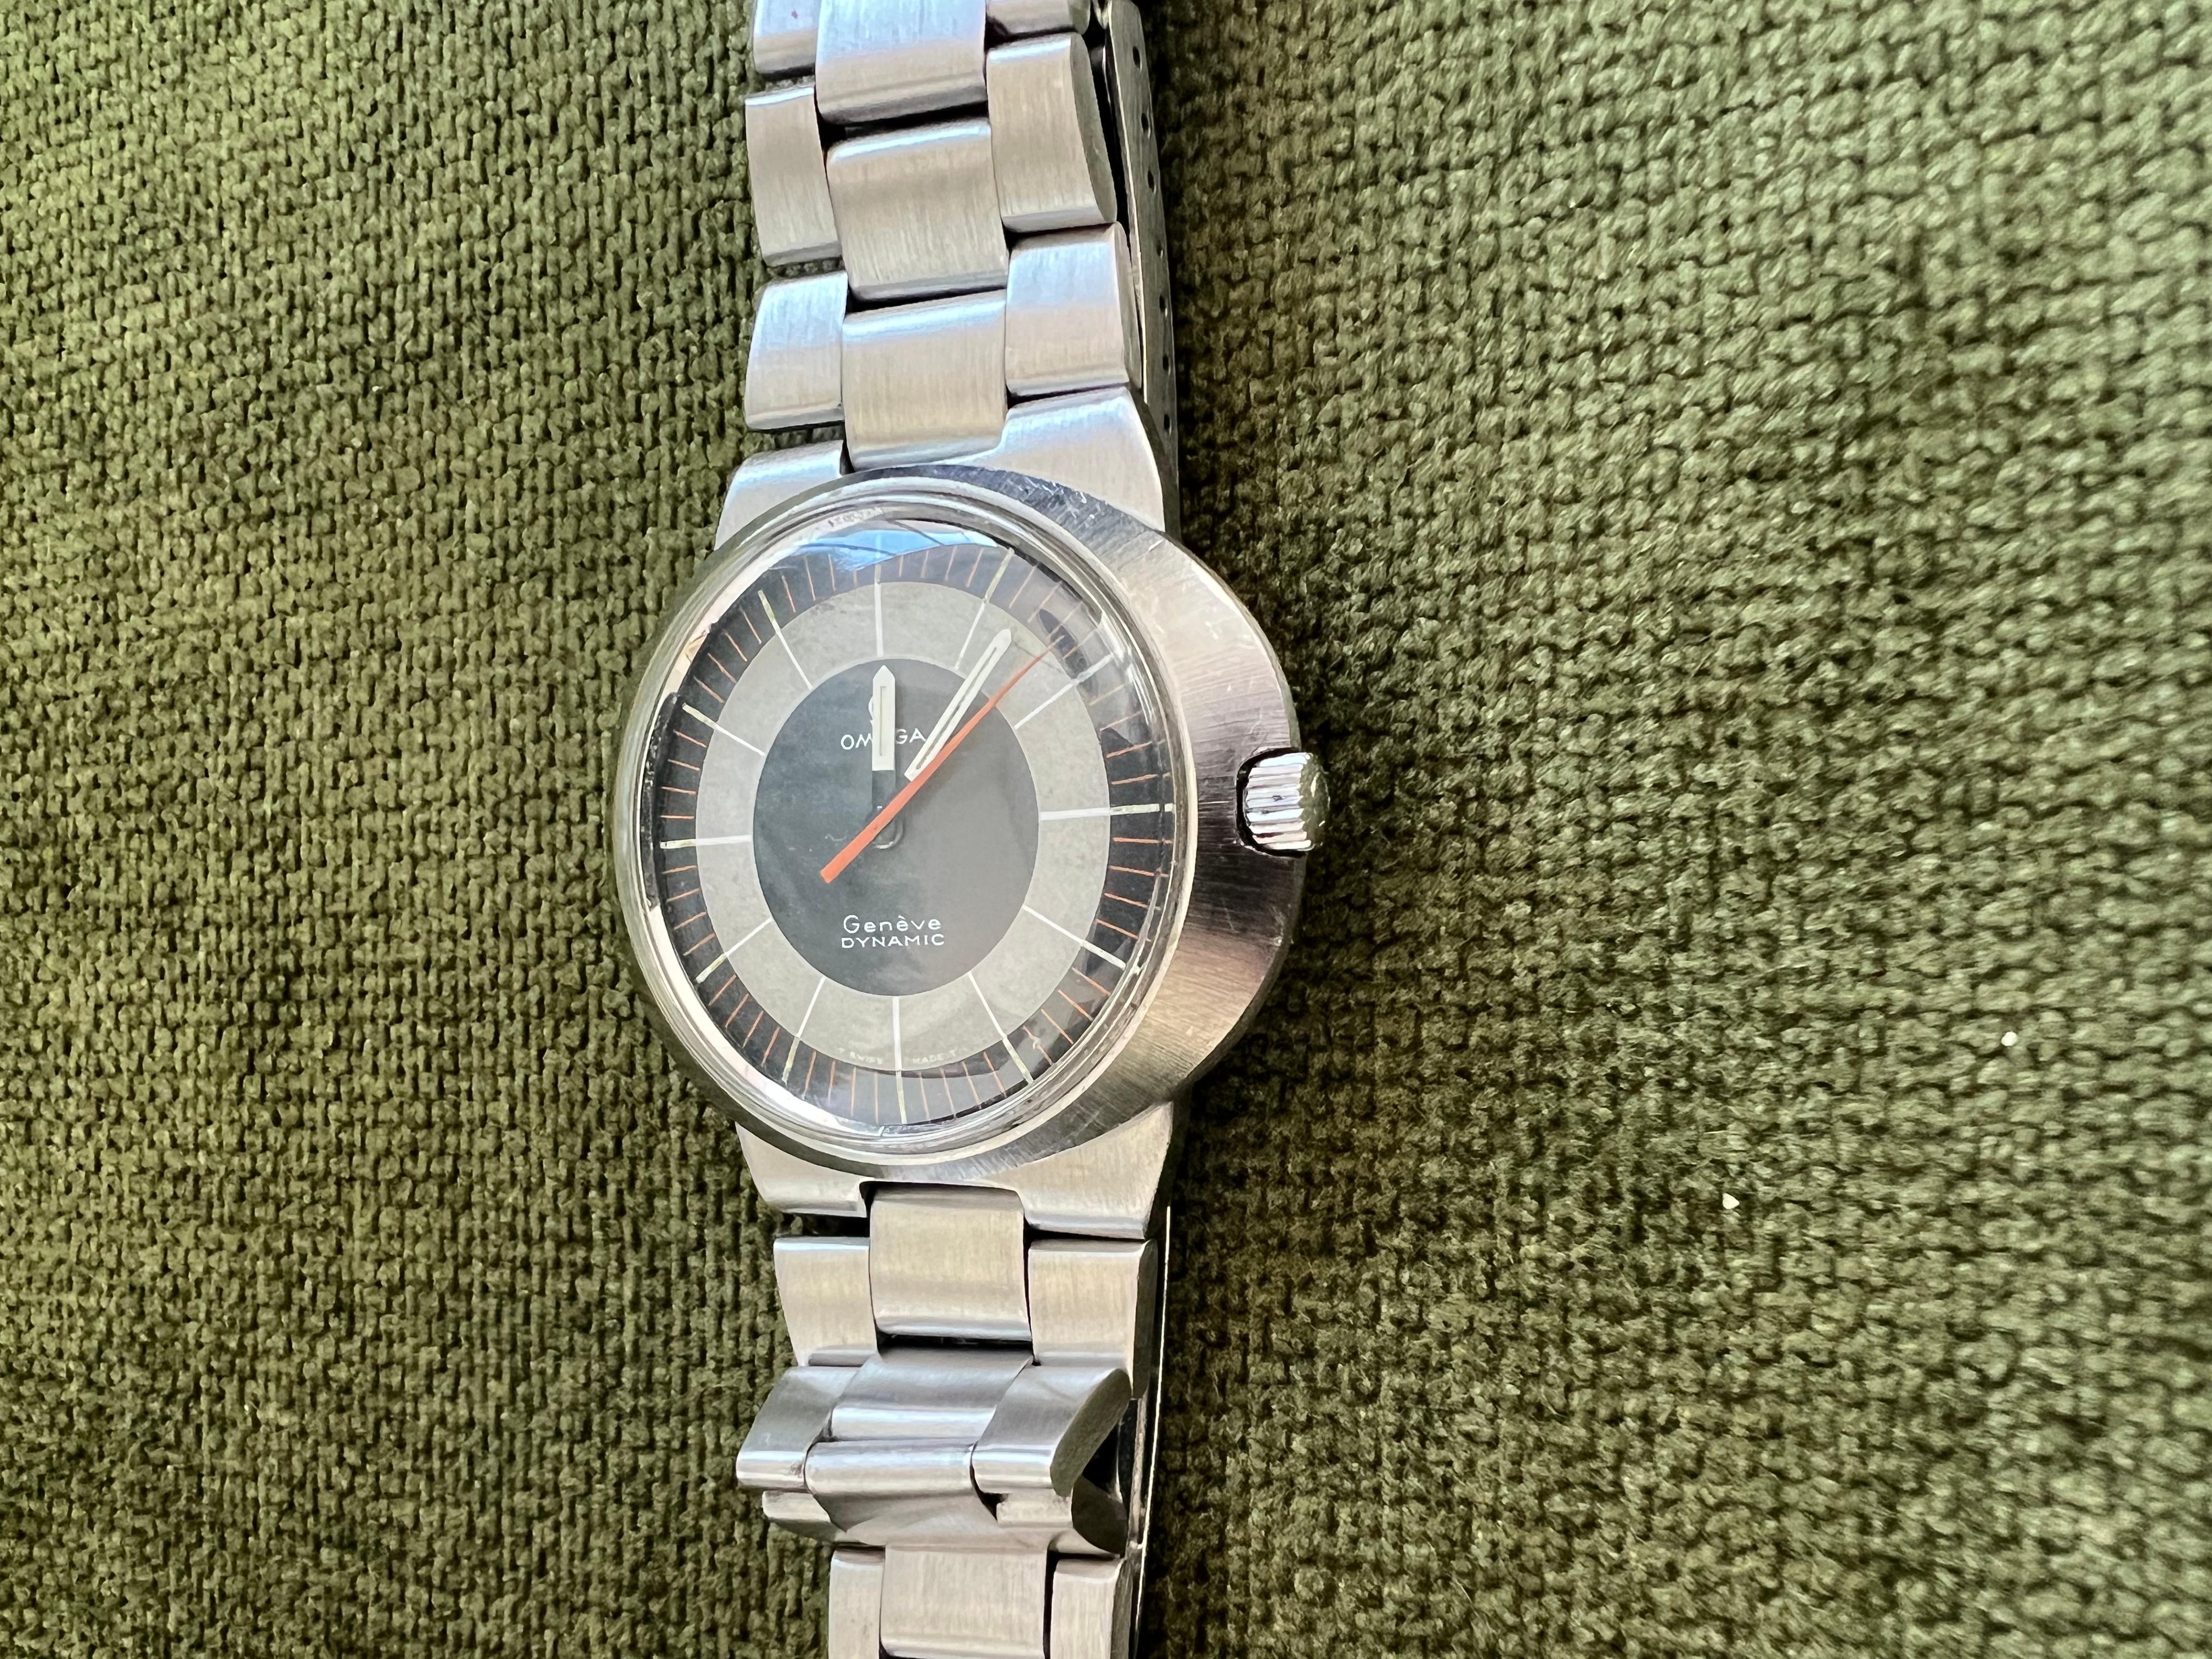 Omega Dynamic Vintage c. 1970s Watch W/ Tricolored Dial 3